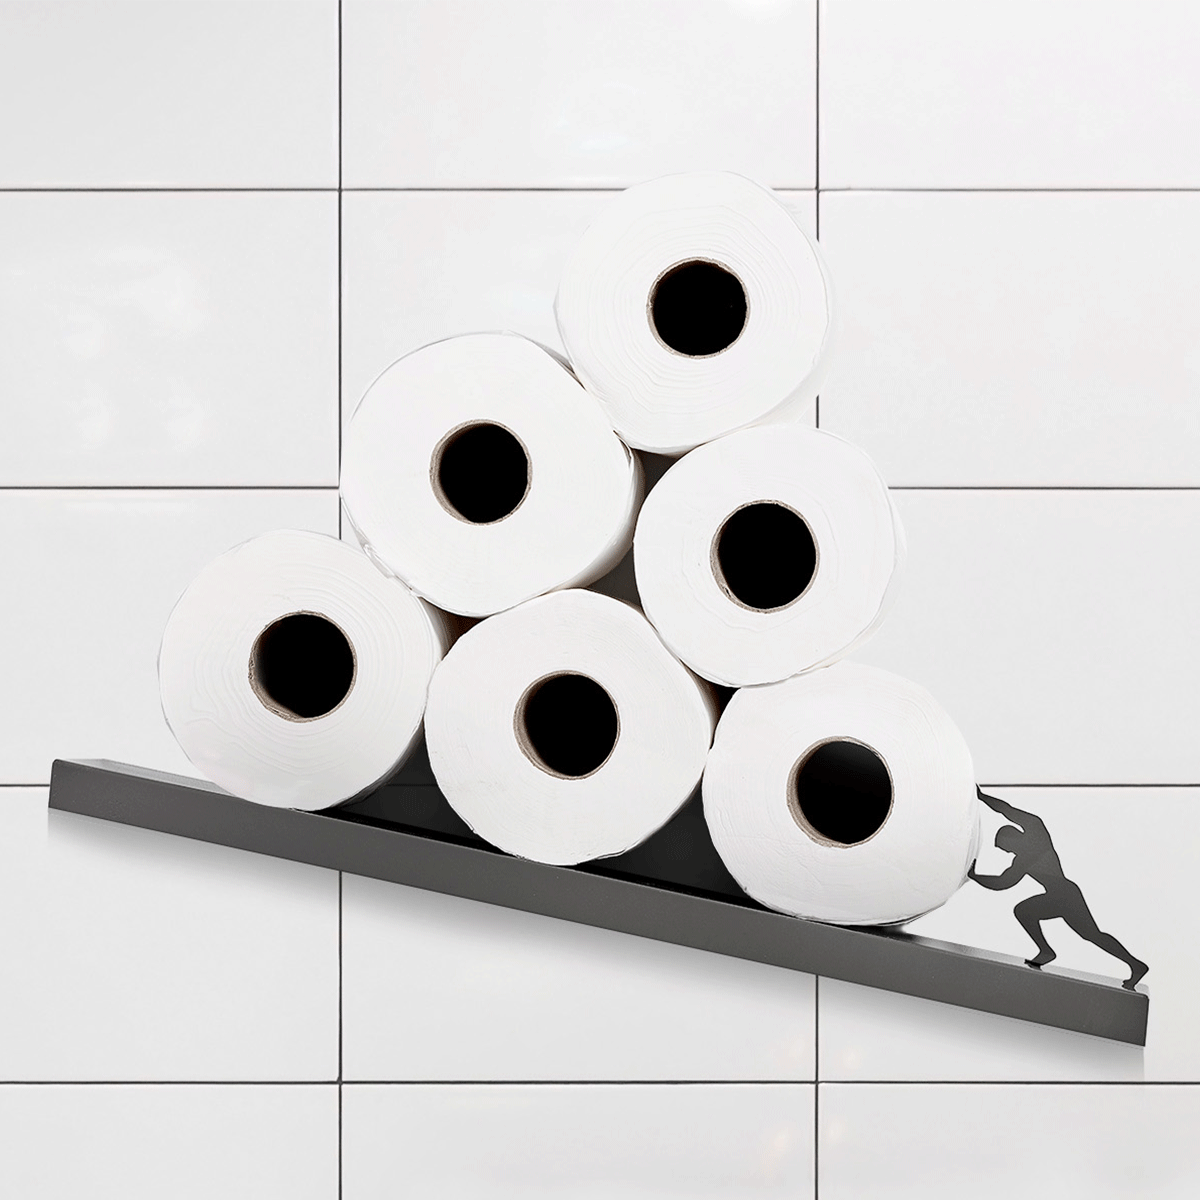 This Toilet Paper Shelf I Designed Is Hard At Work All The Time